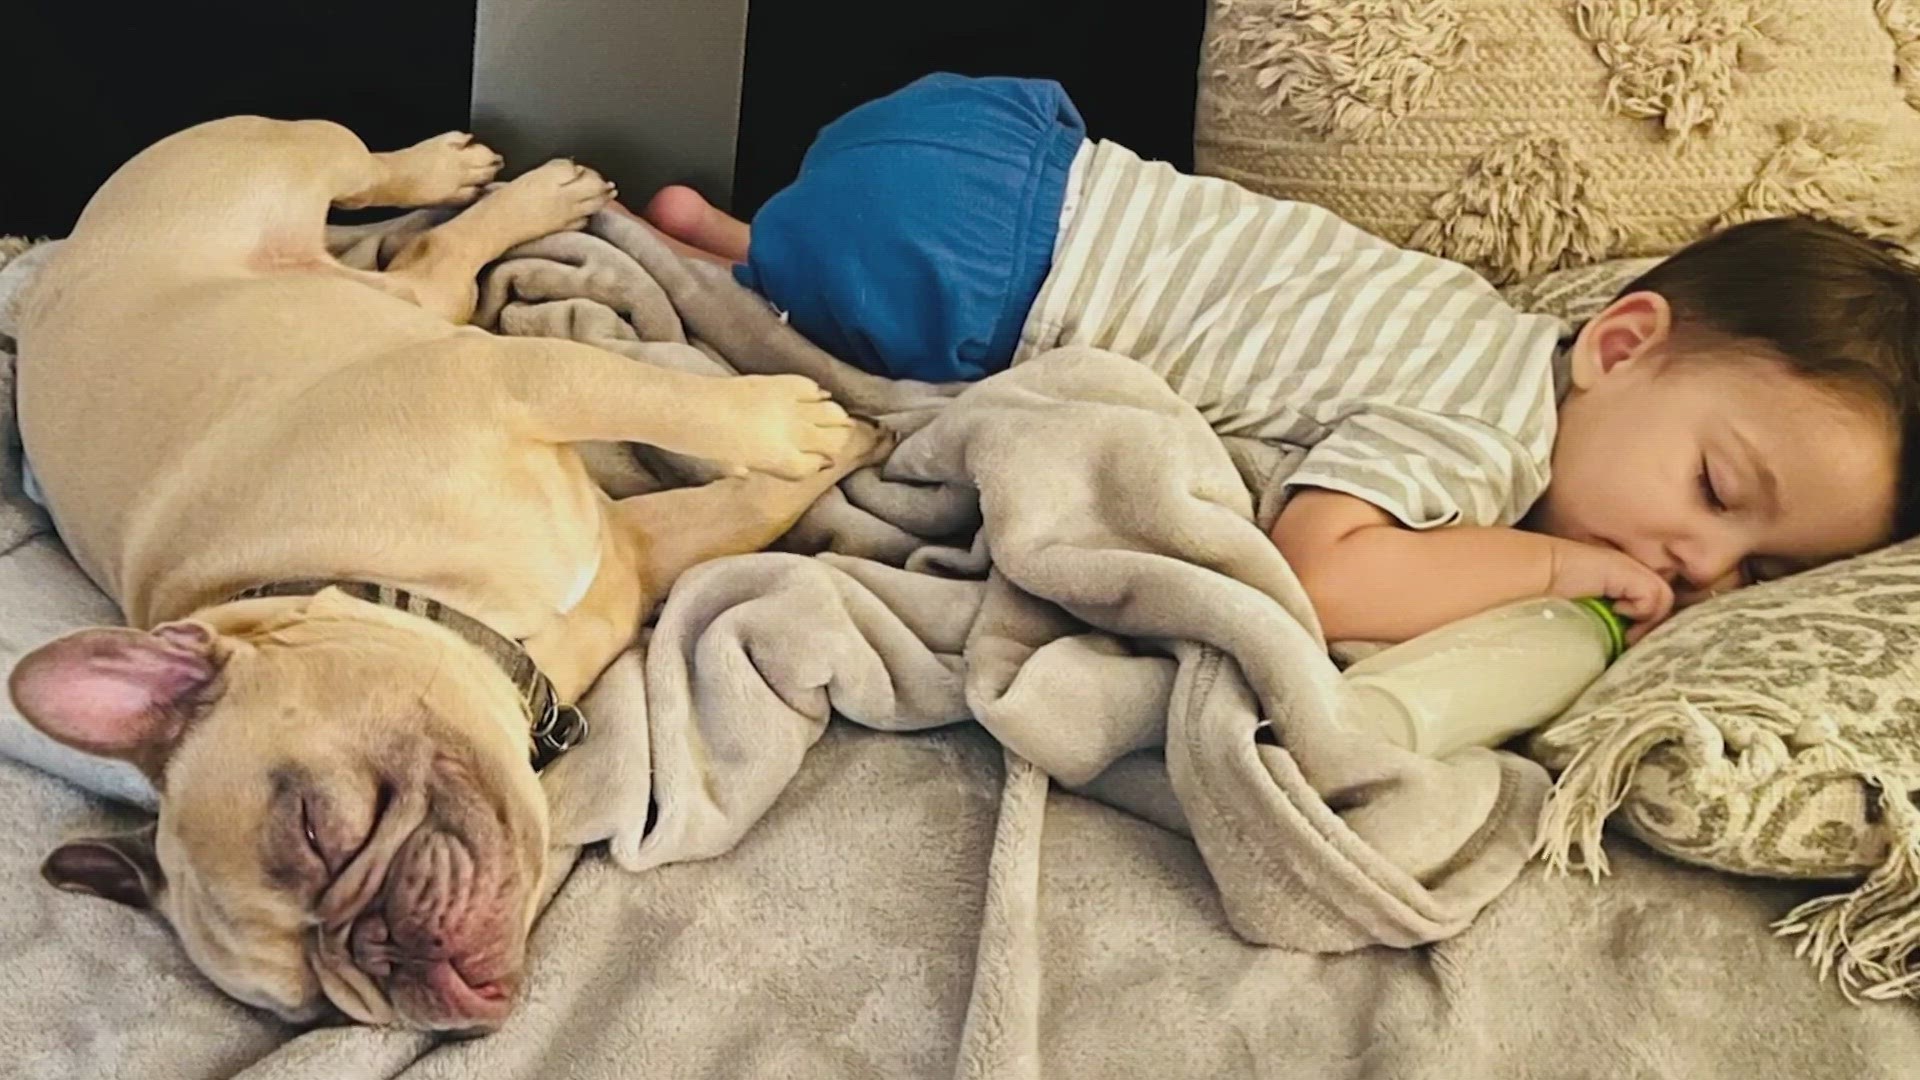 Luca, a 5-year-old French bulldog, was taken during a break-in at an apartment in the Rice Military area on Feb. 27.